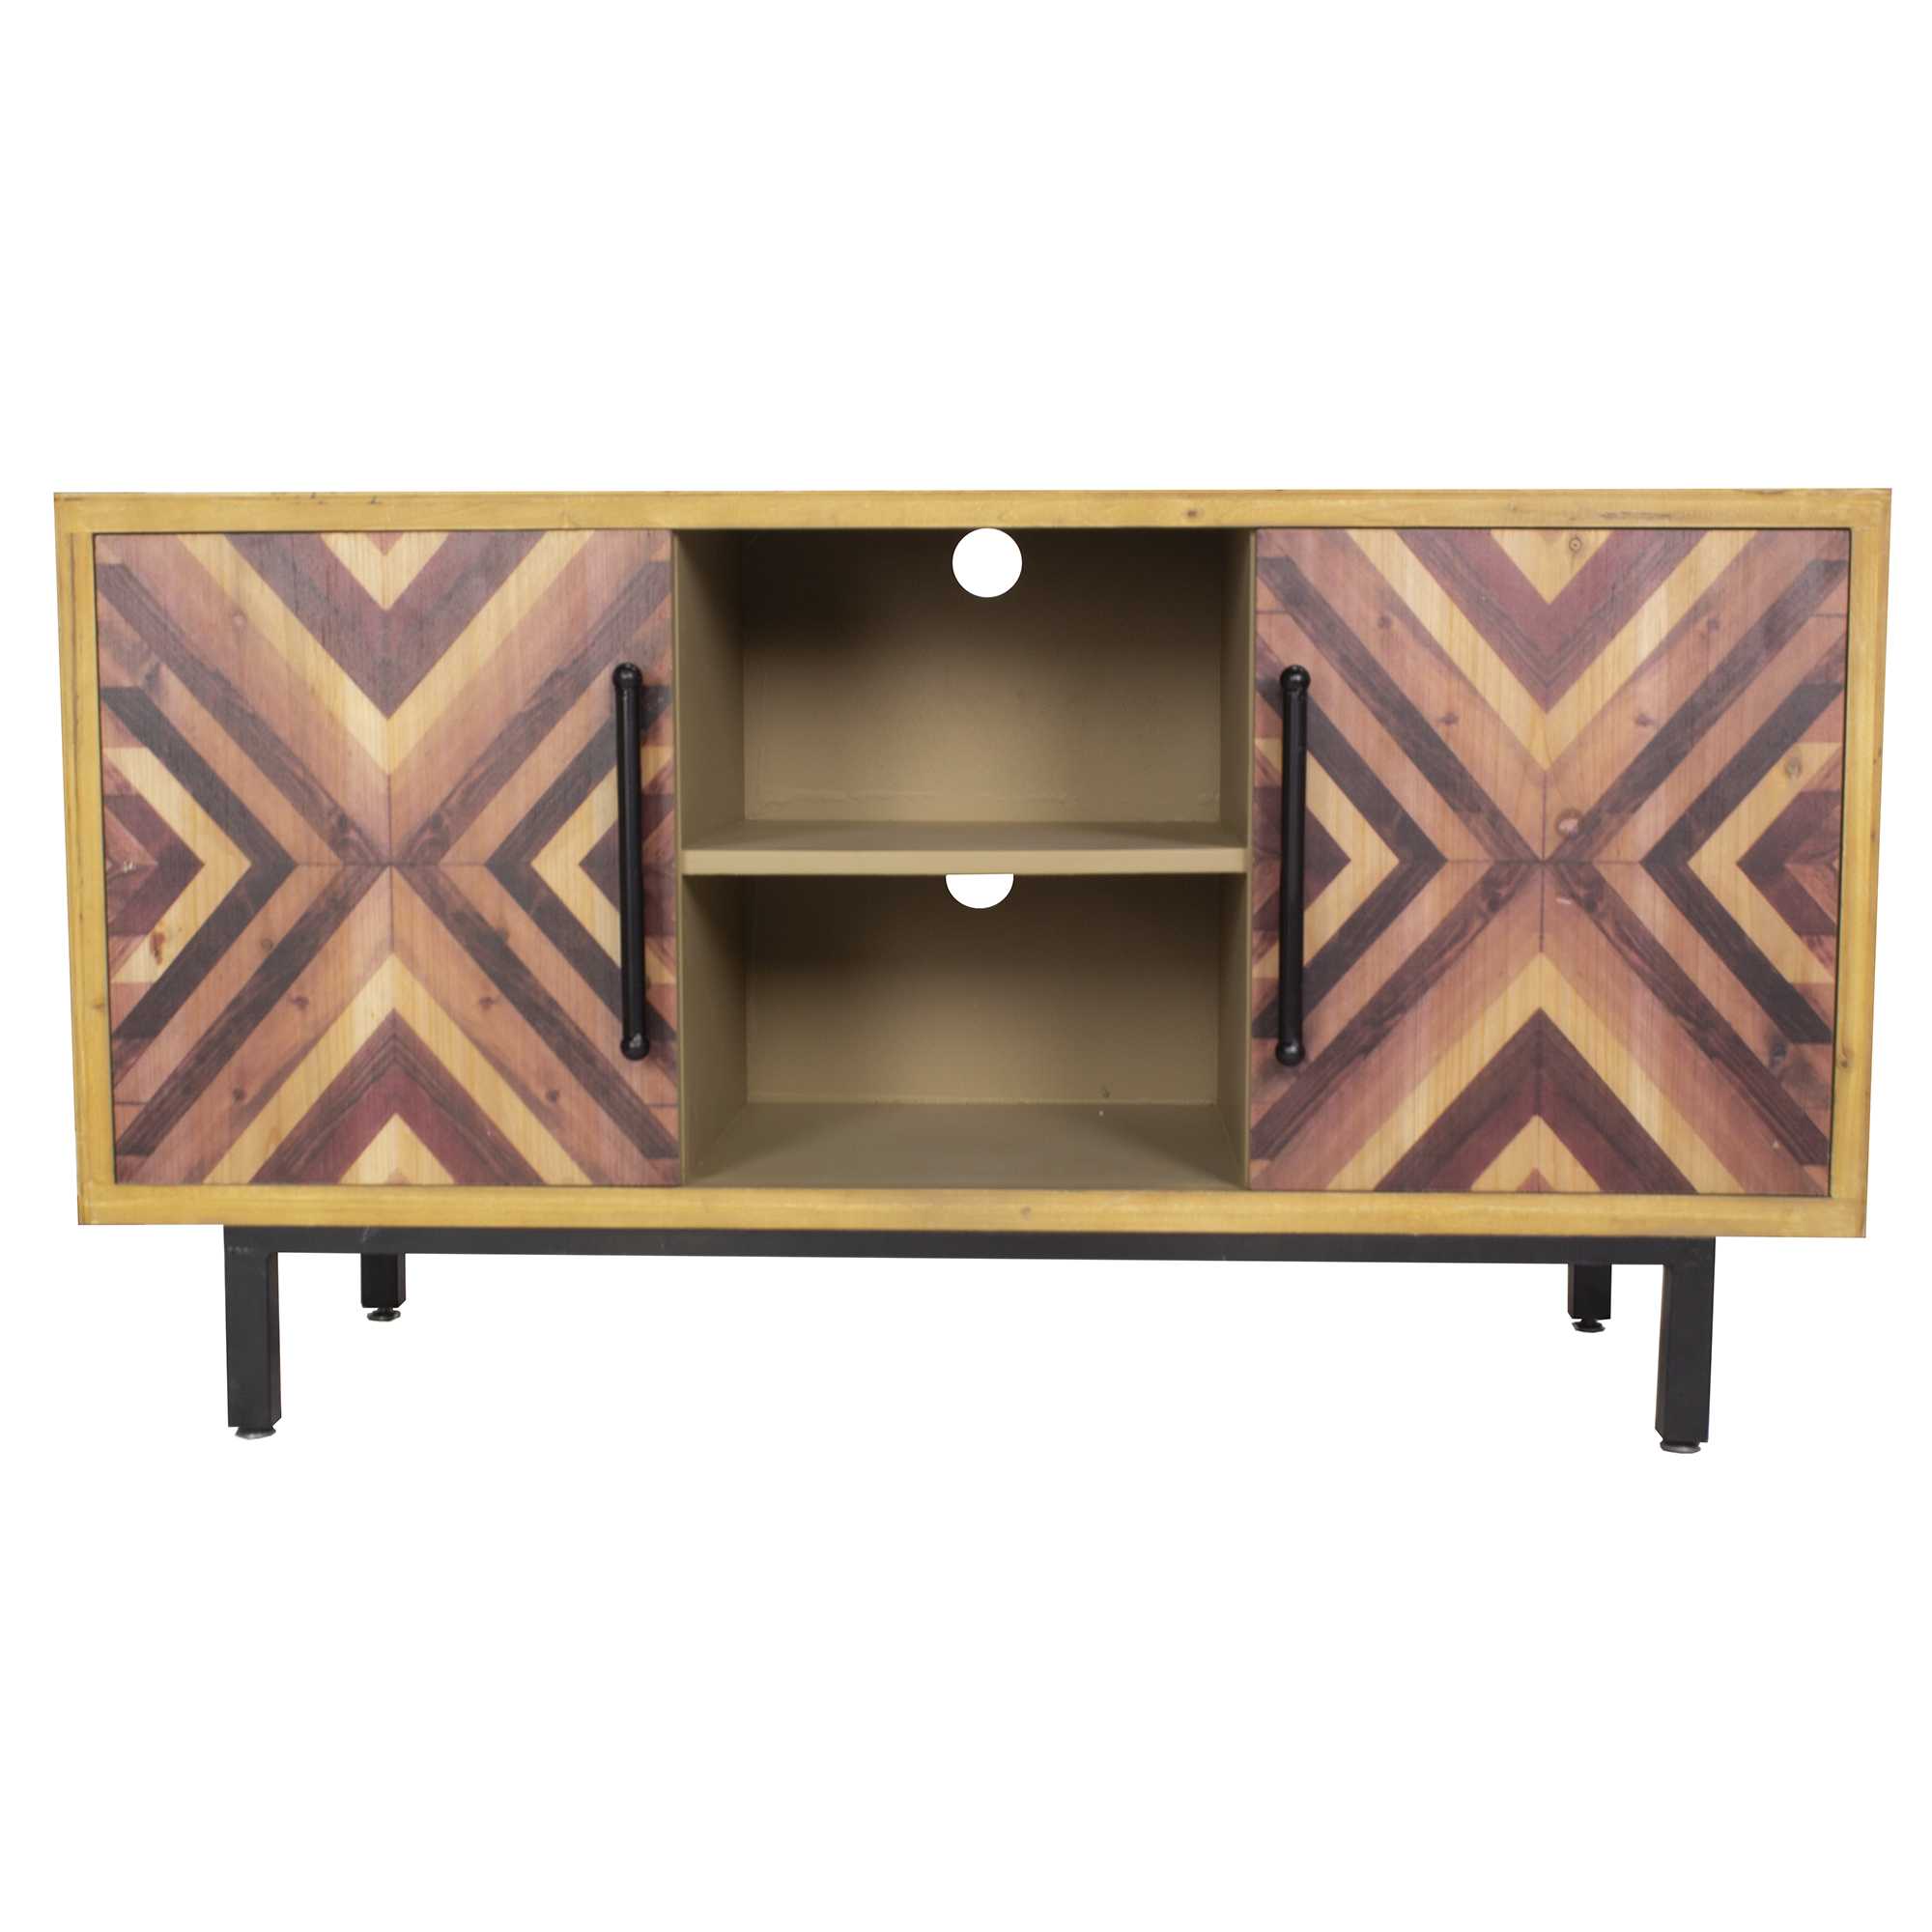 47.25" X 15.75" X 25.25" Brown MDF Contemporary Wooden Media Console Cabinet